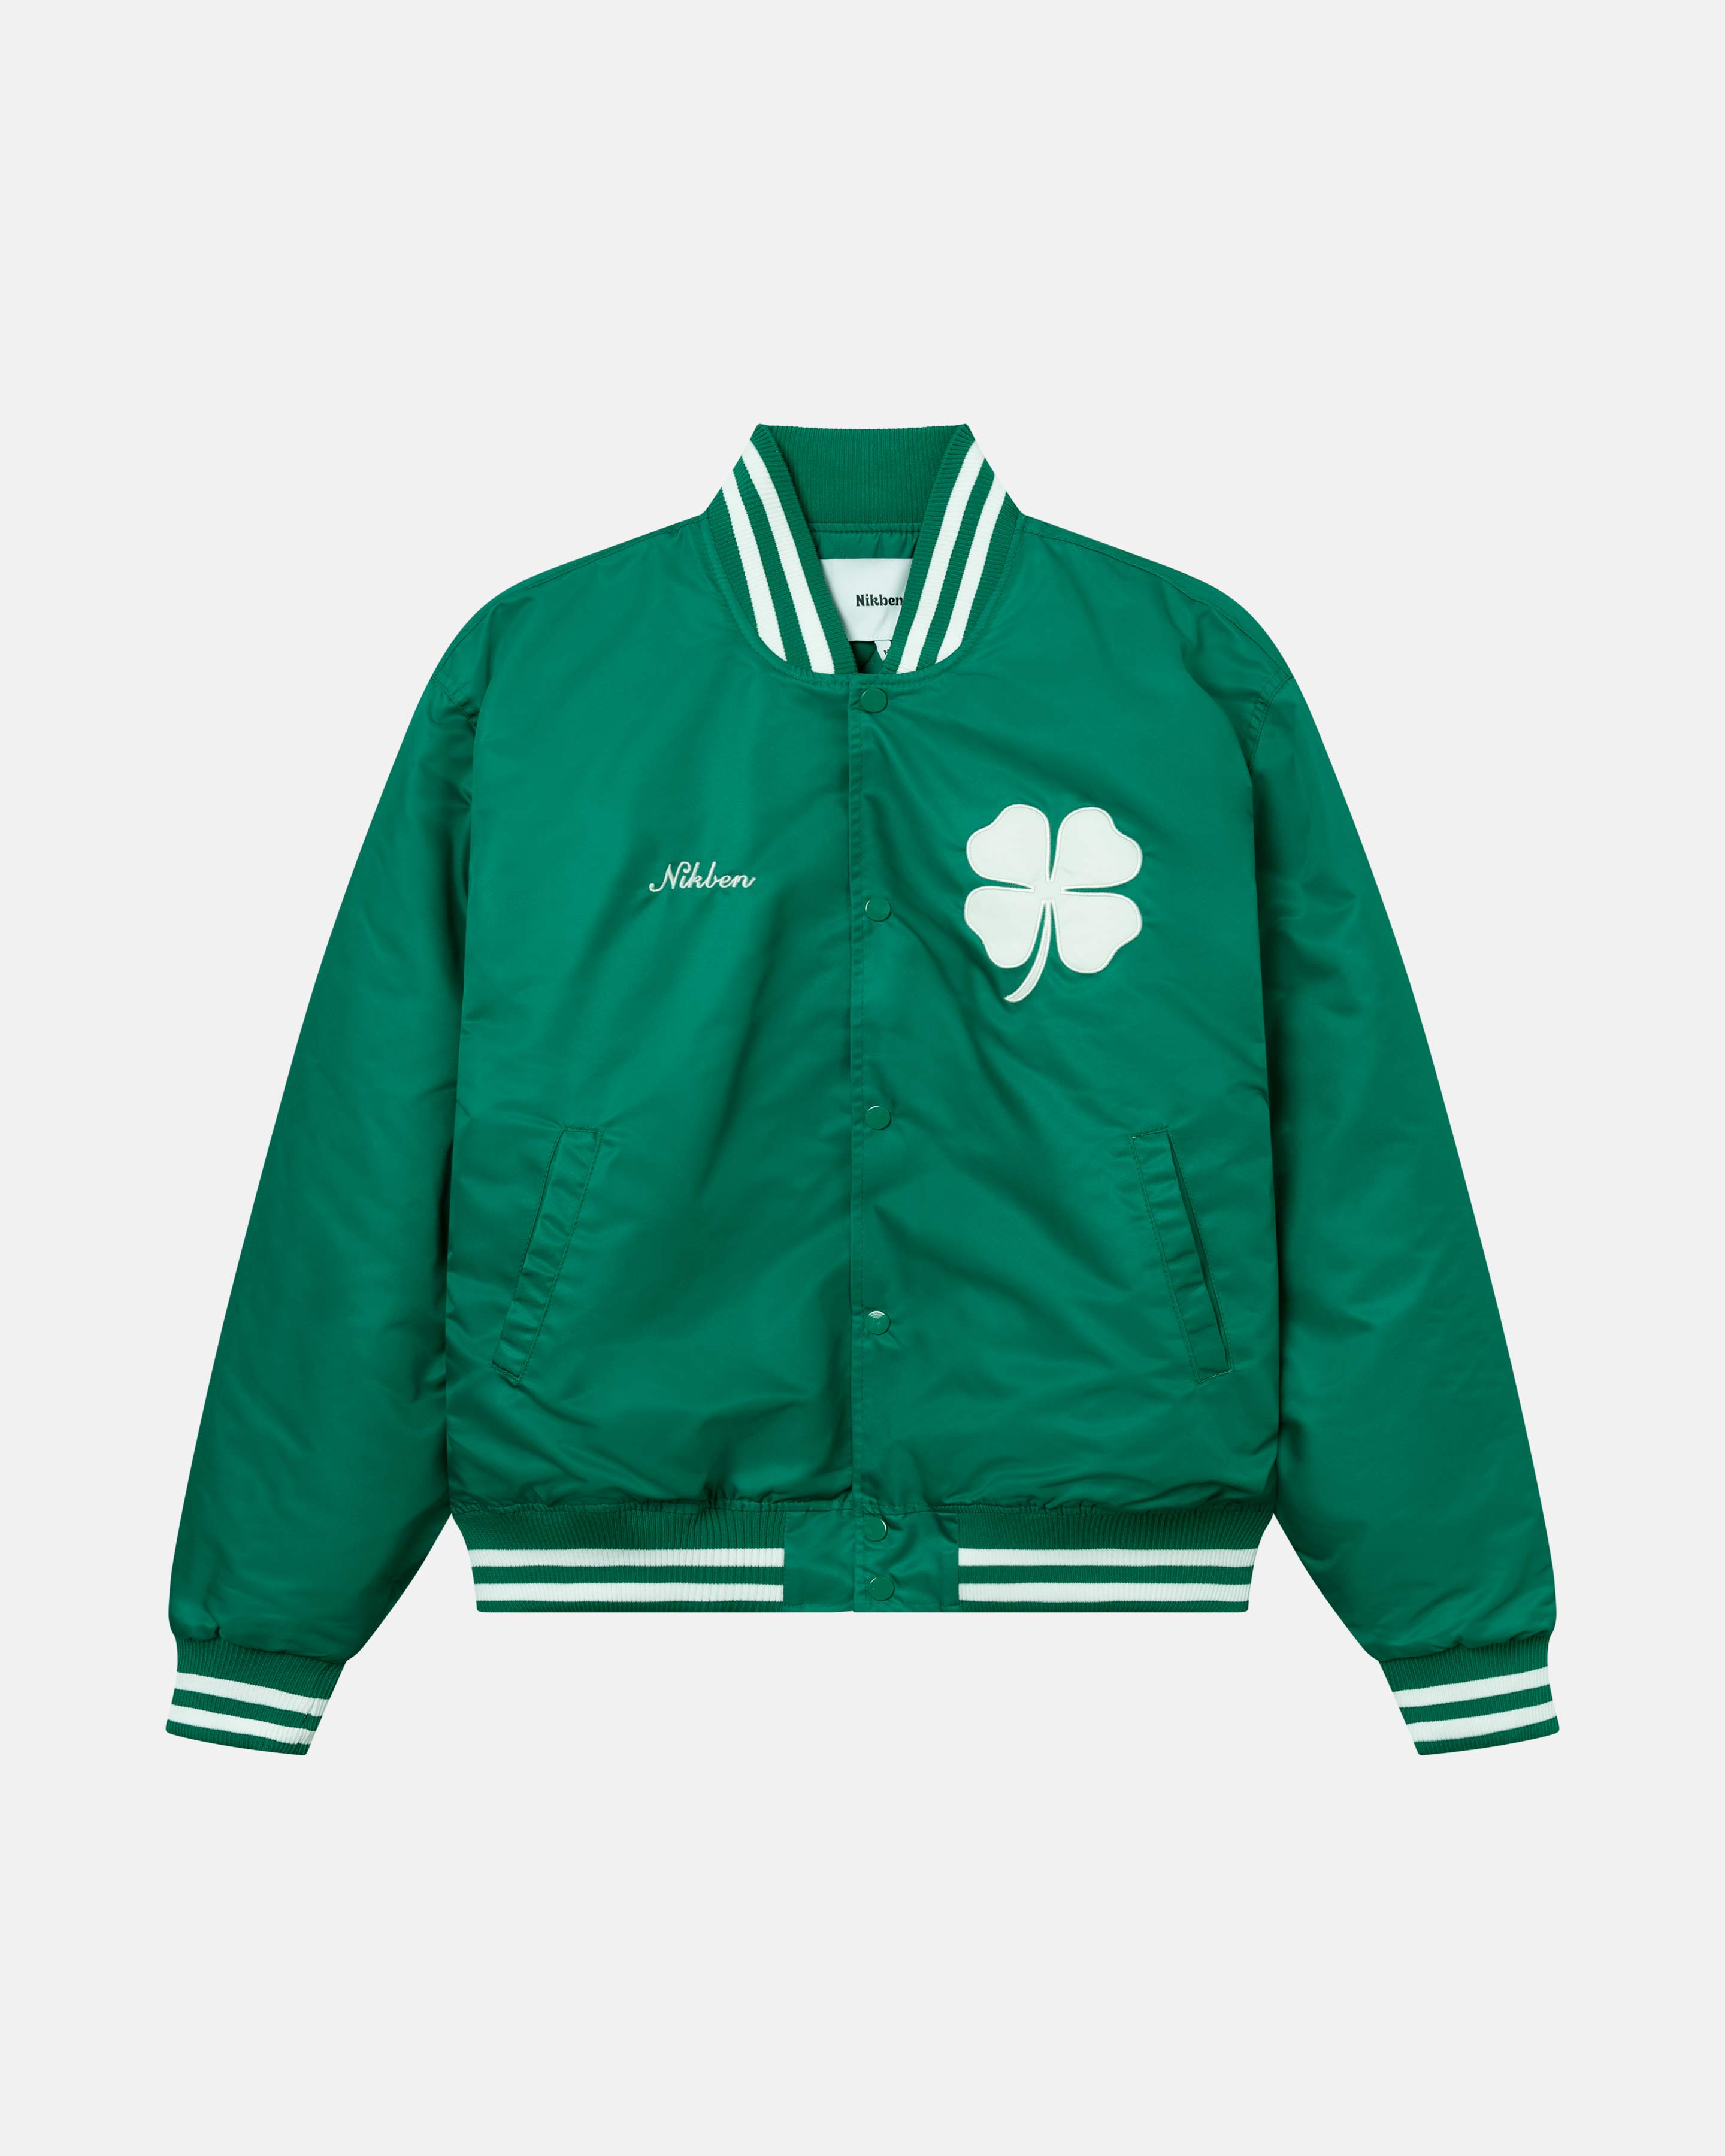 Green 80s style baseball jacket with embroidered 